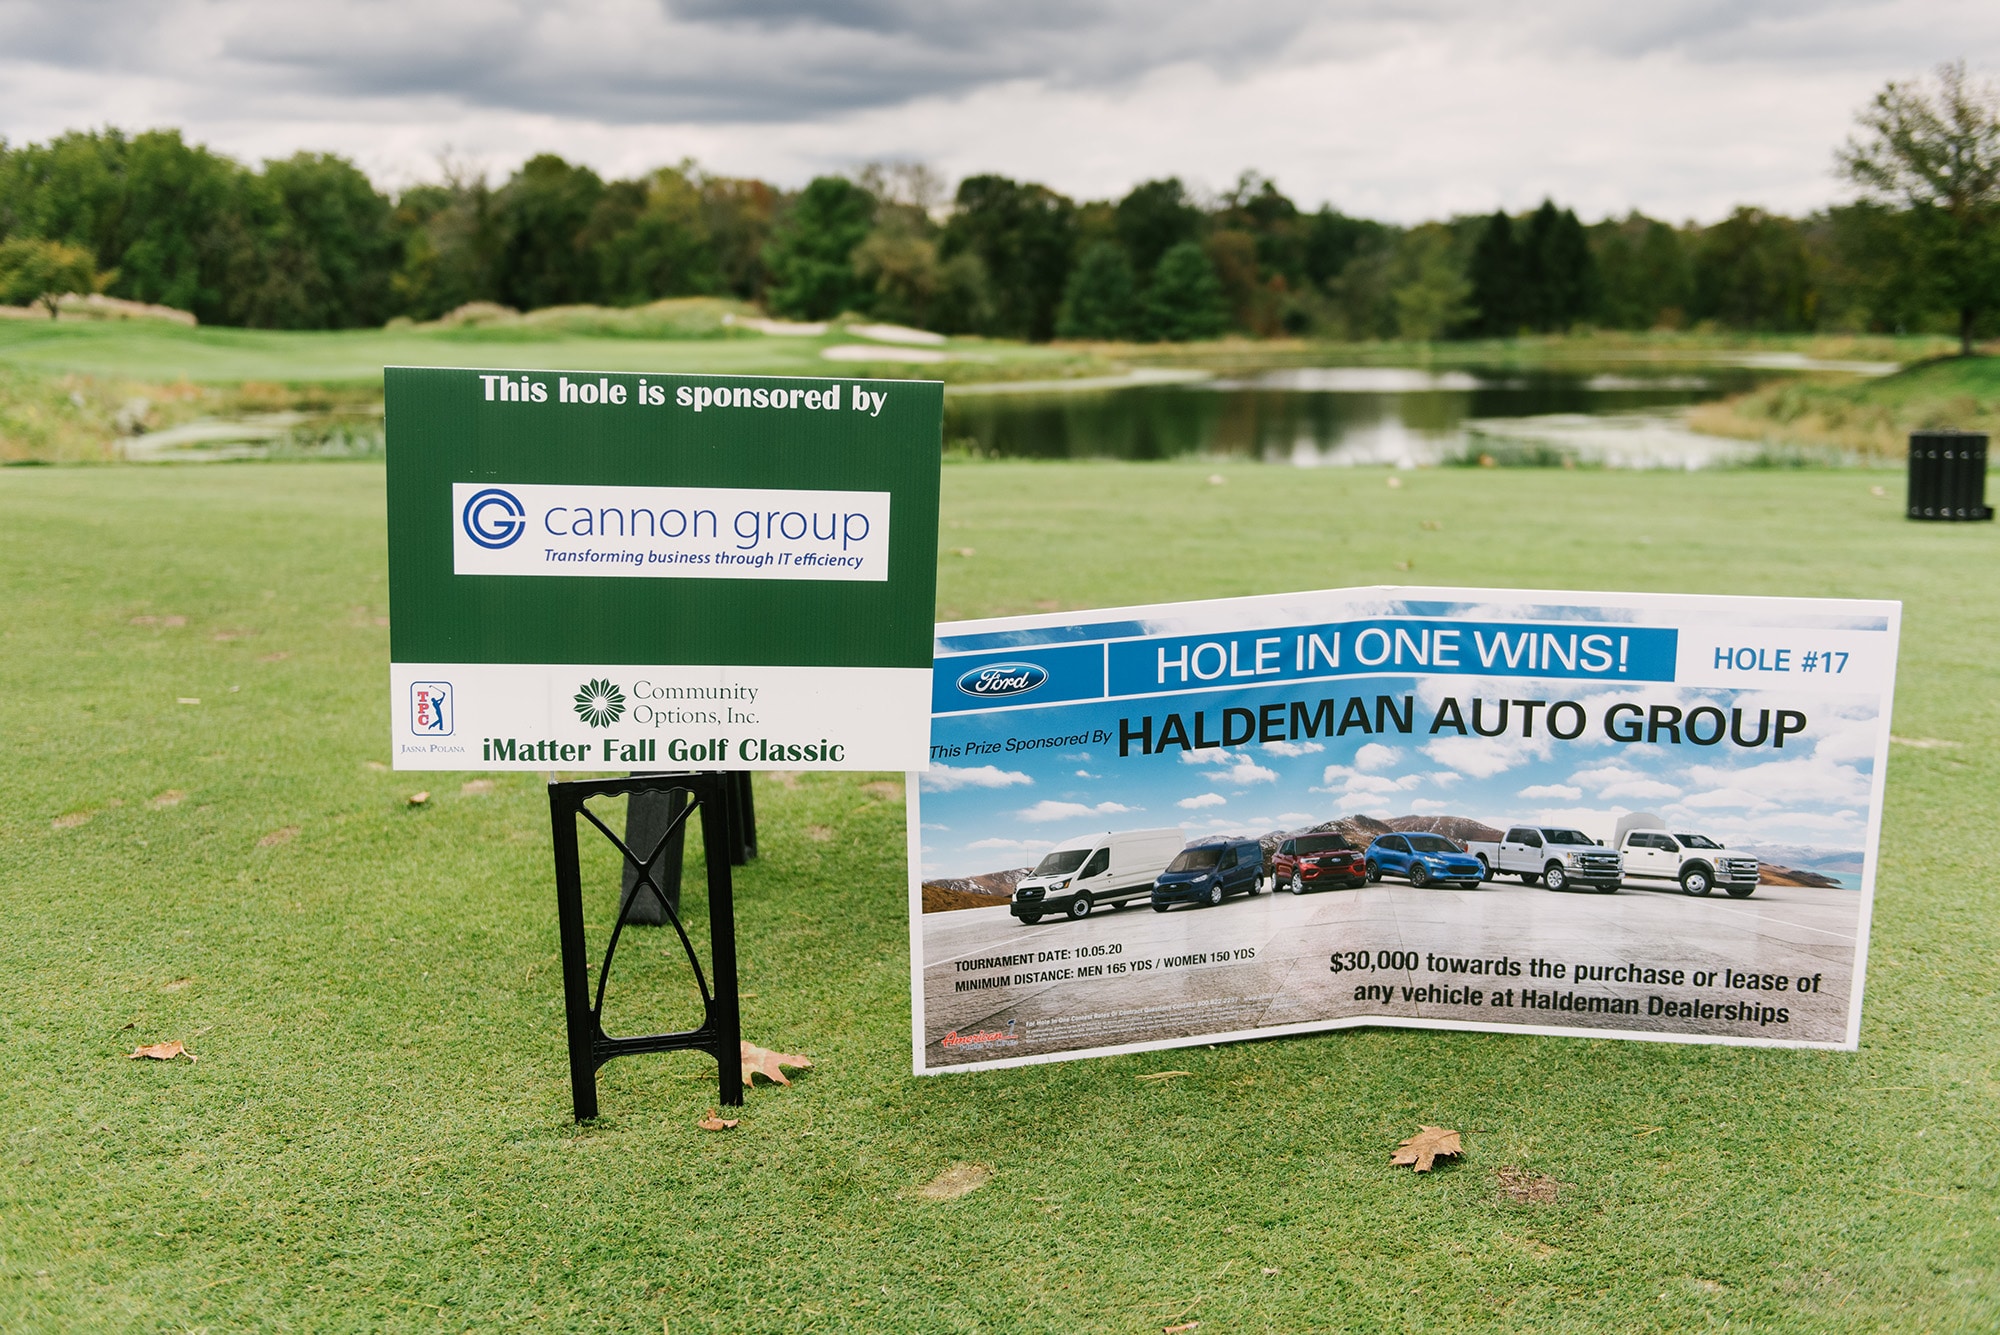 On October 5th, 2020 Community Options, Inc. will host its golf outing at TPC Jasna Polana in Princeton, New Jersey.